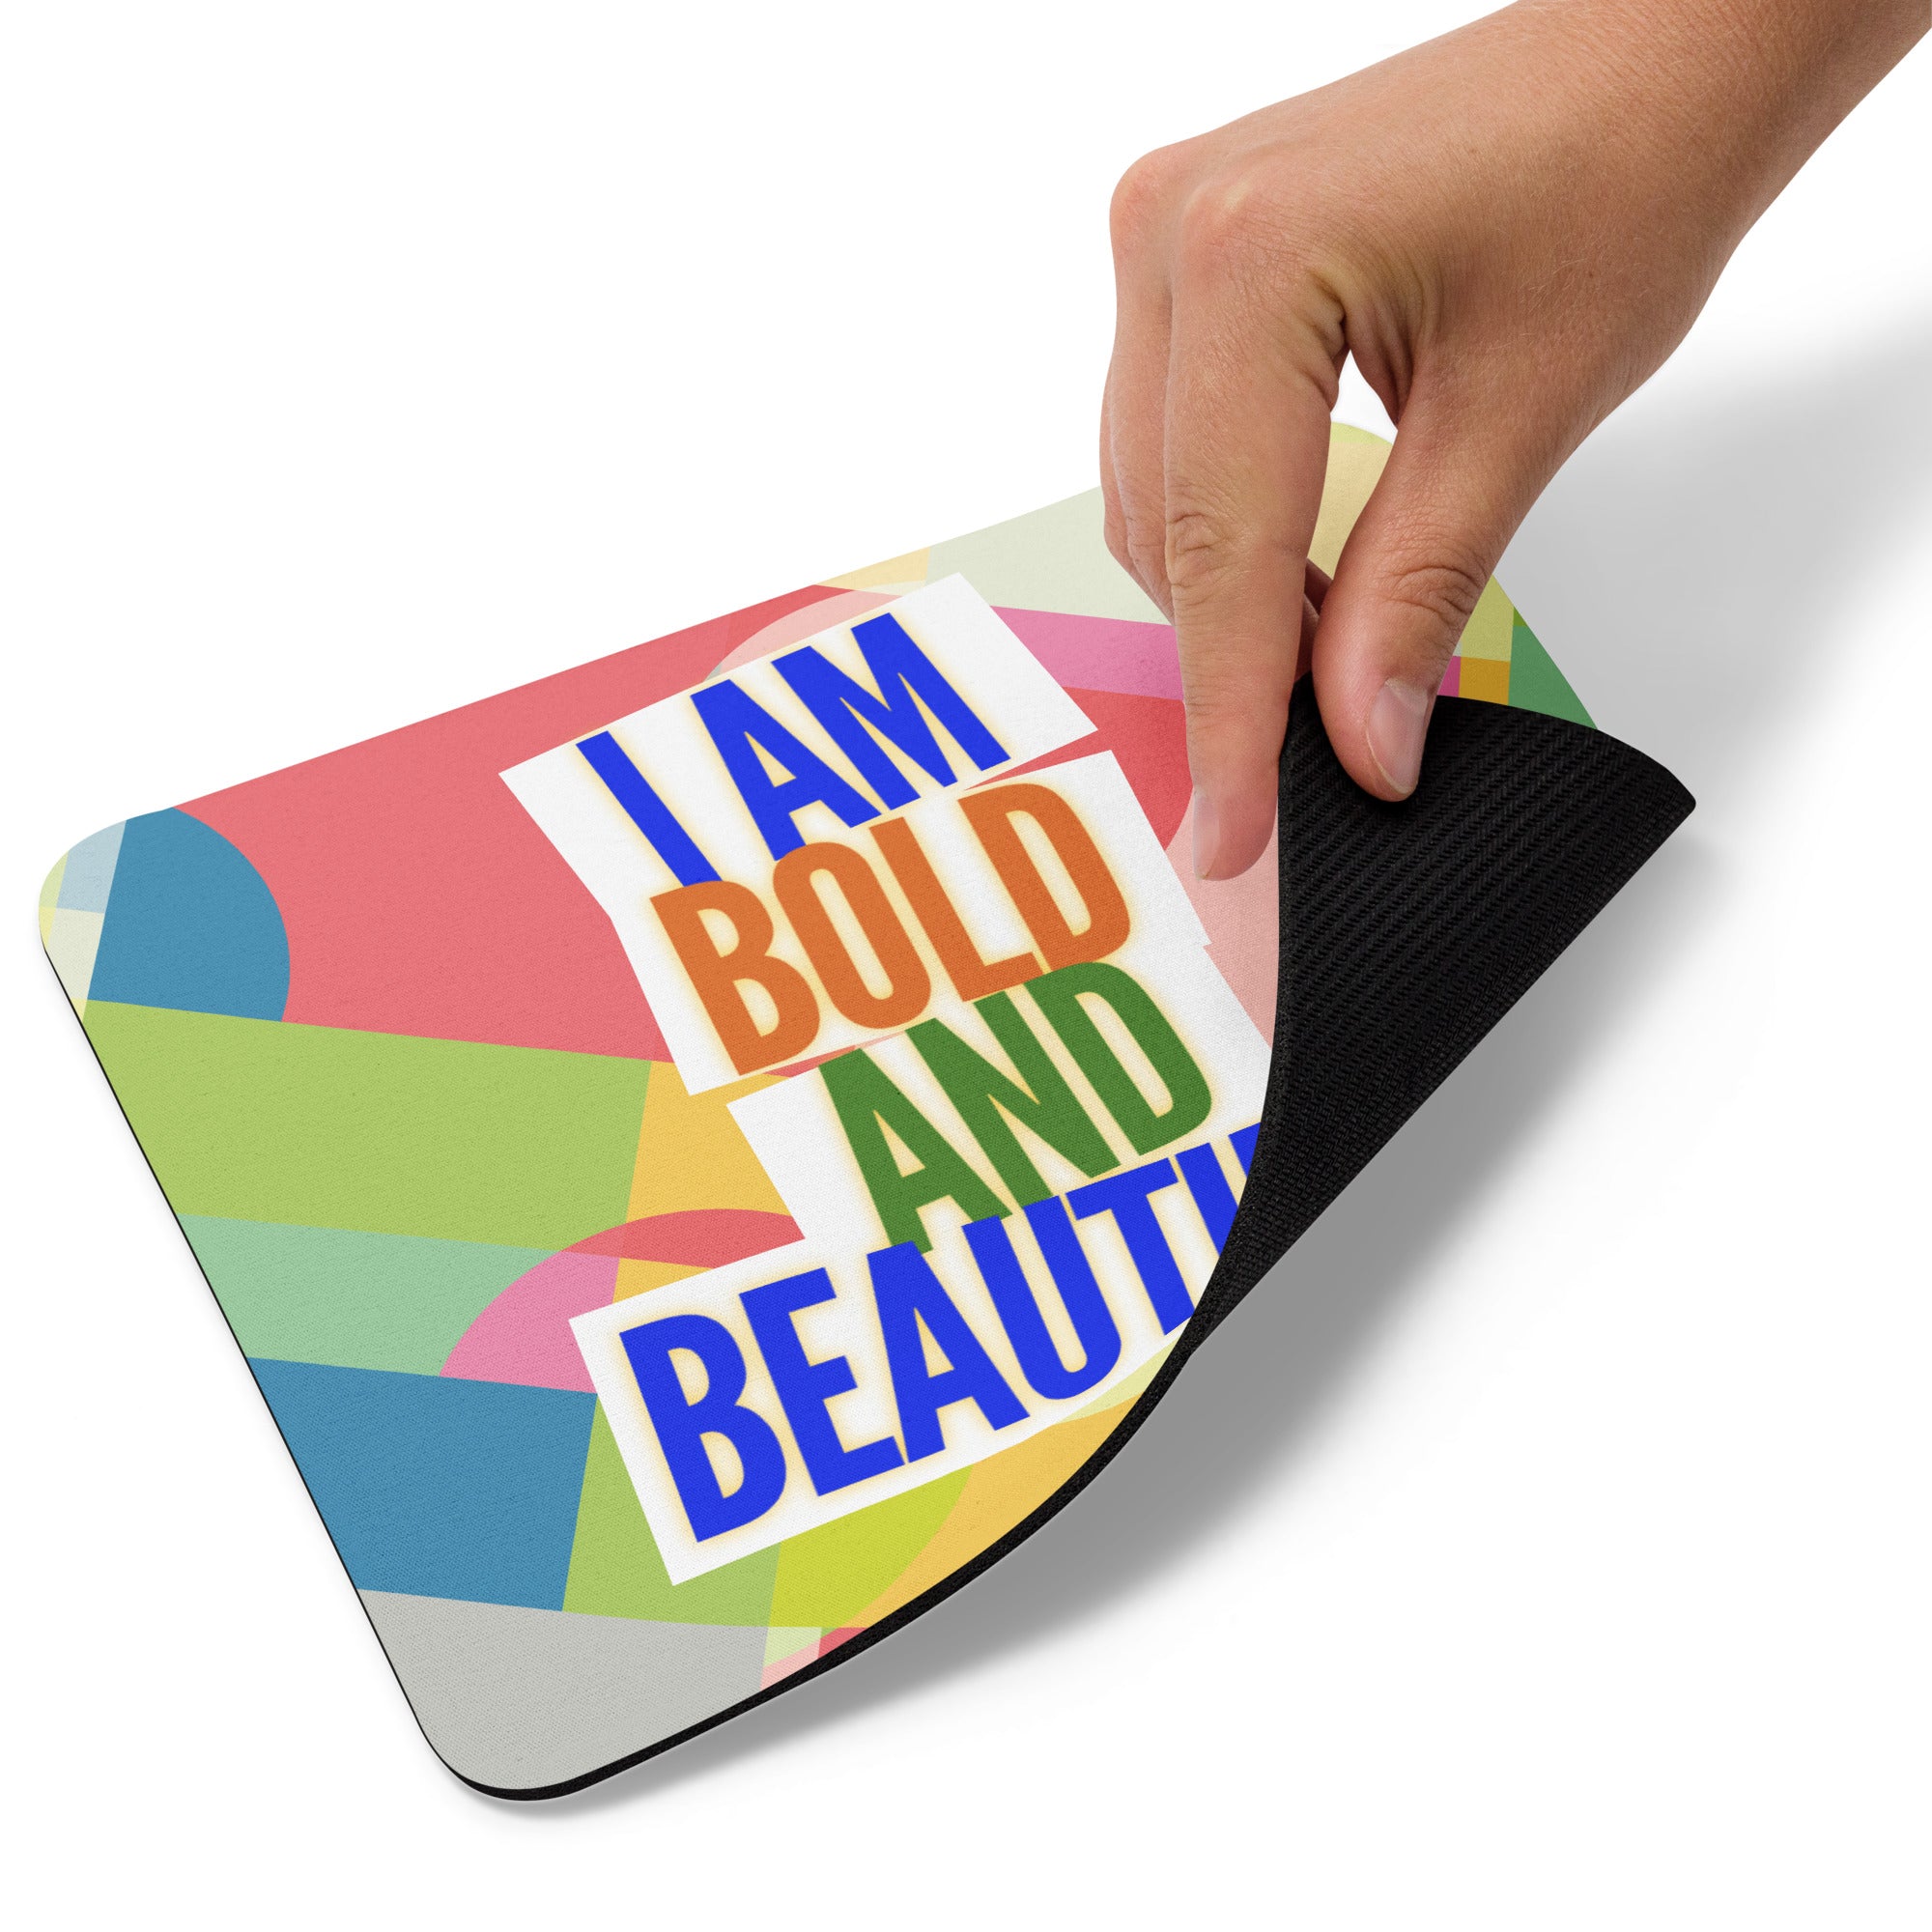 GloWell Designs - Mouse Pad - Affirmation Quote - I Am Bold & Beautiful - GloWell Designs